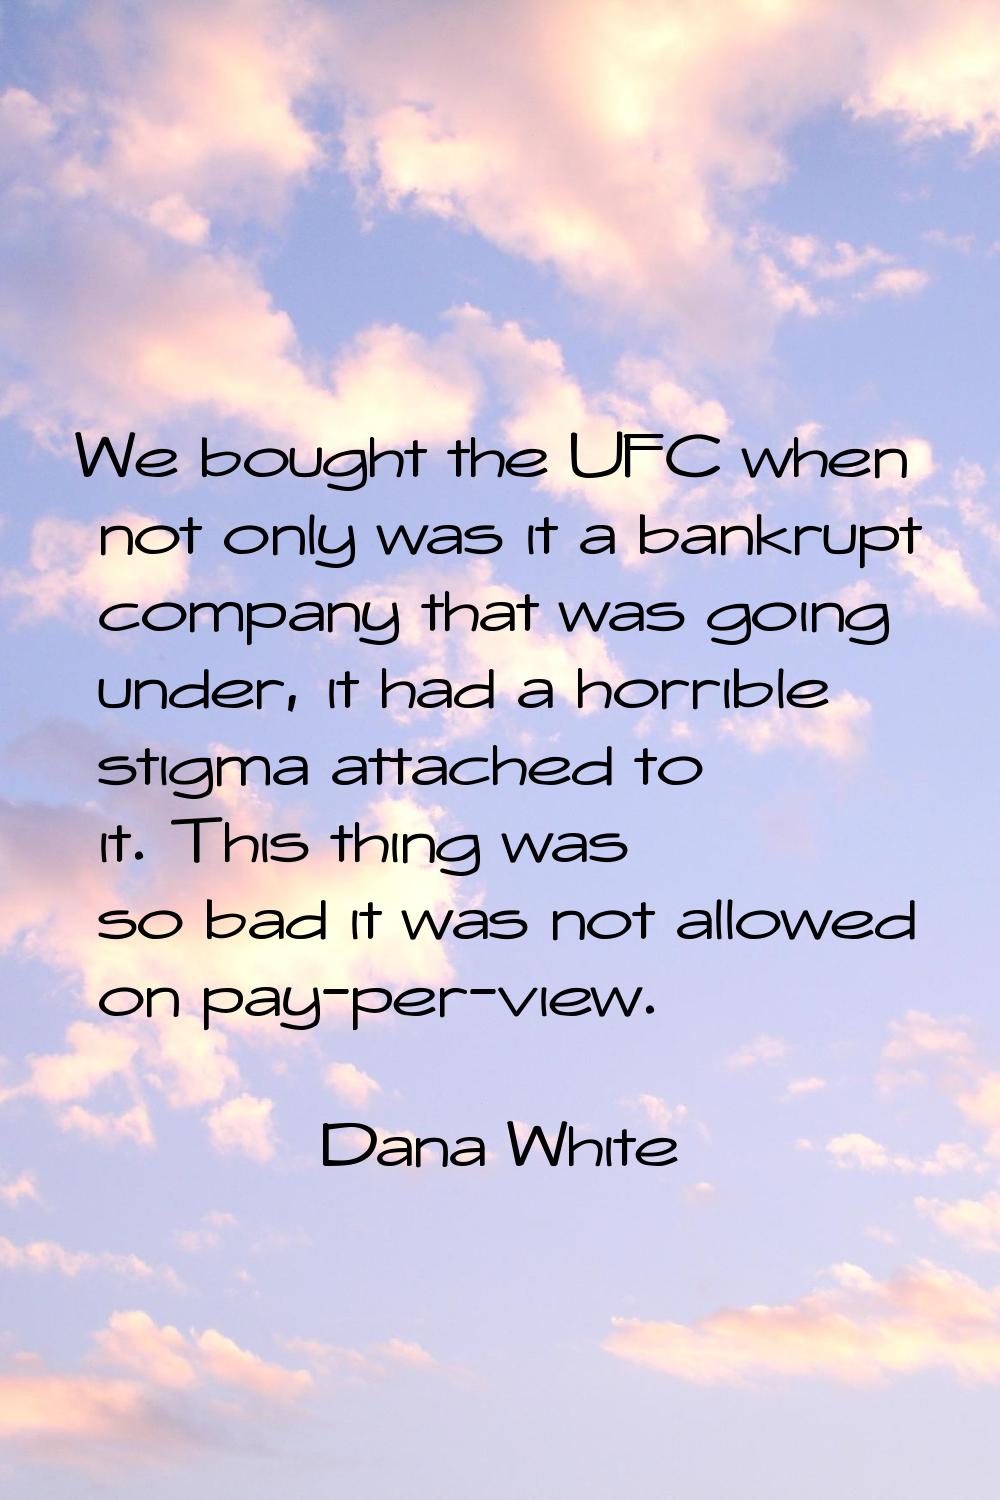 We bought the UFC when not only was it a bankrupt company that was going under, it had a horrible s